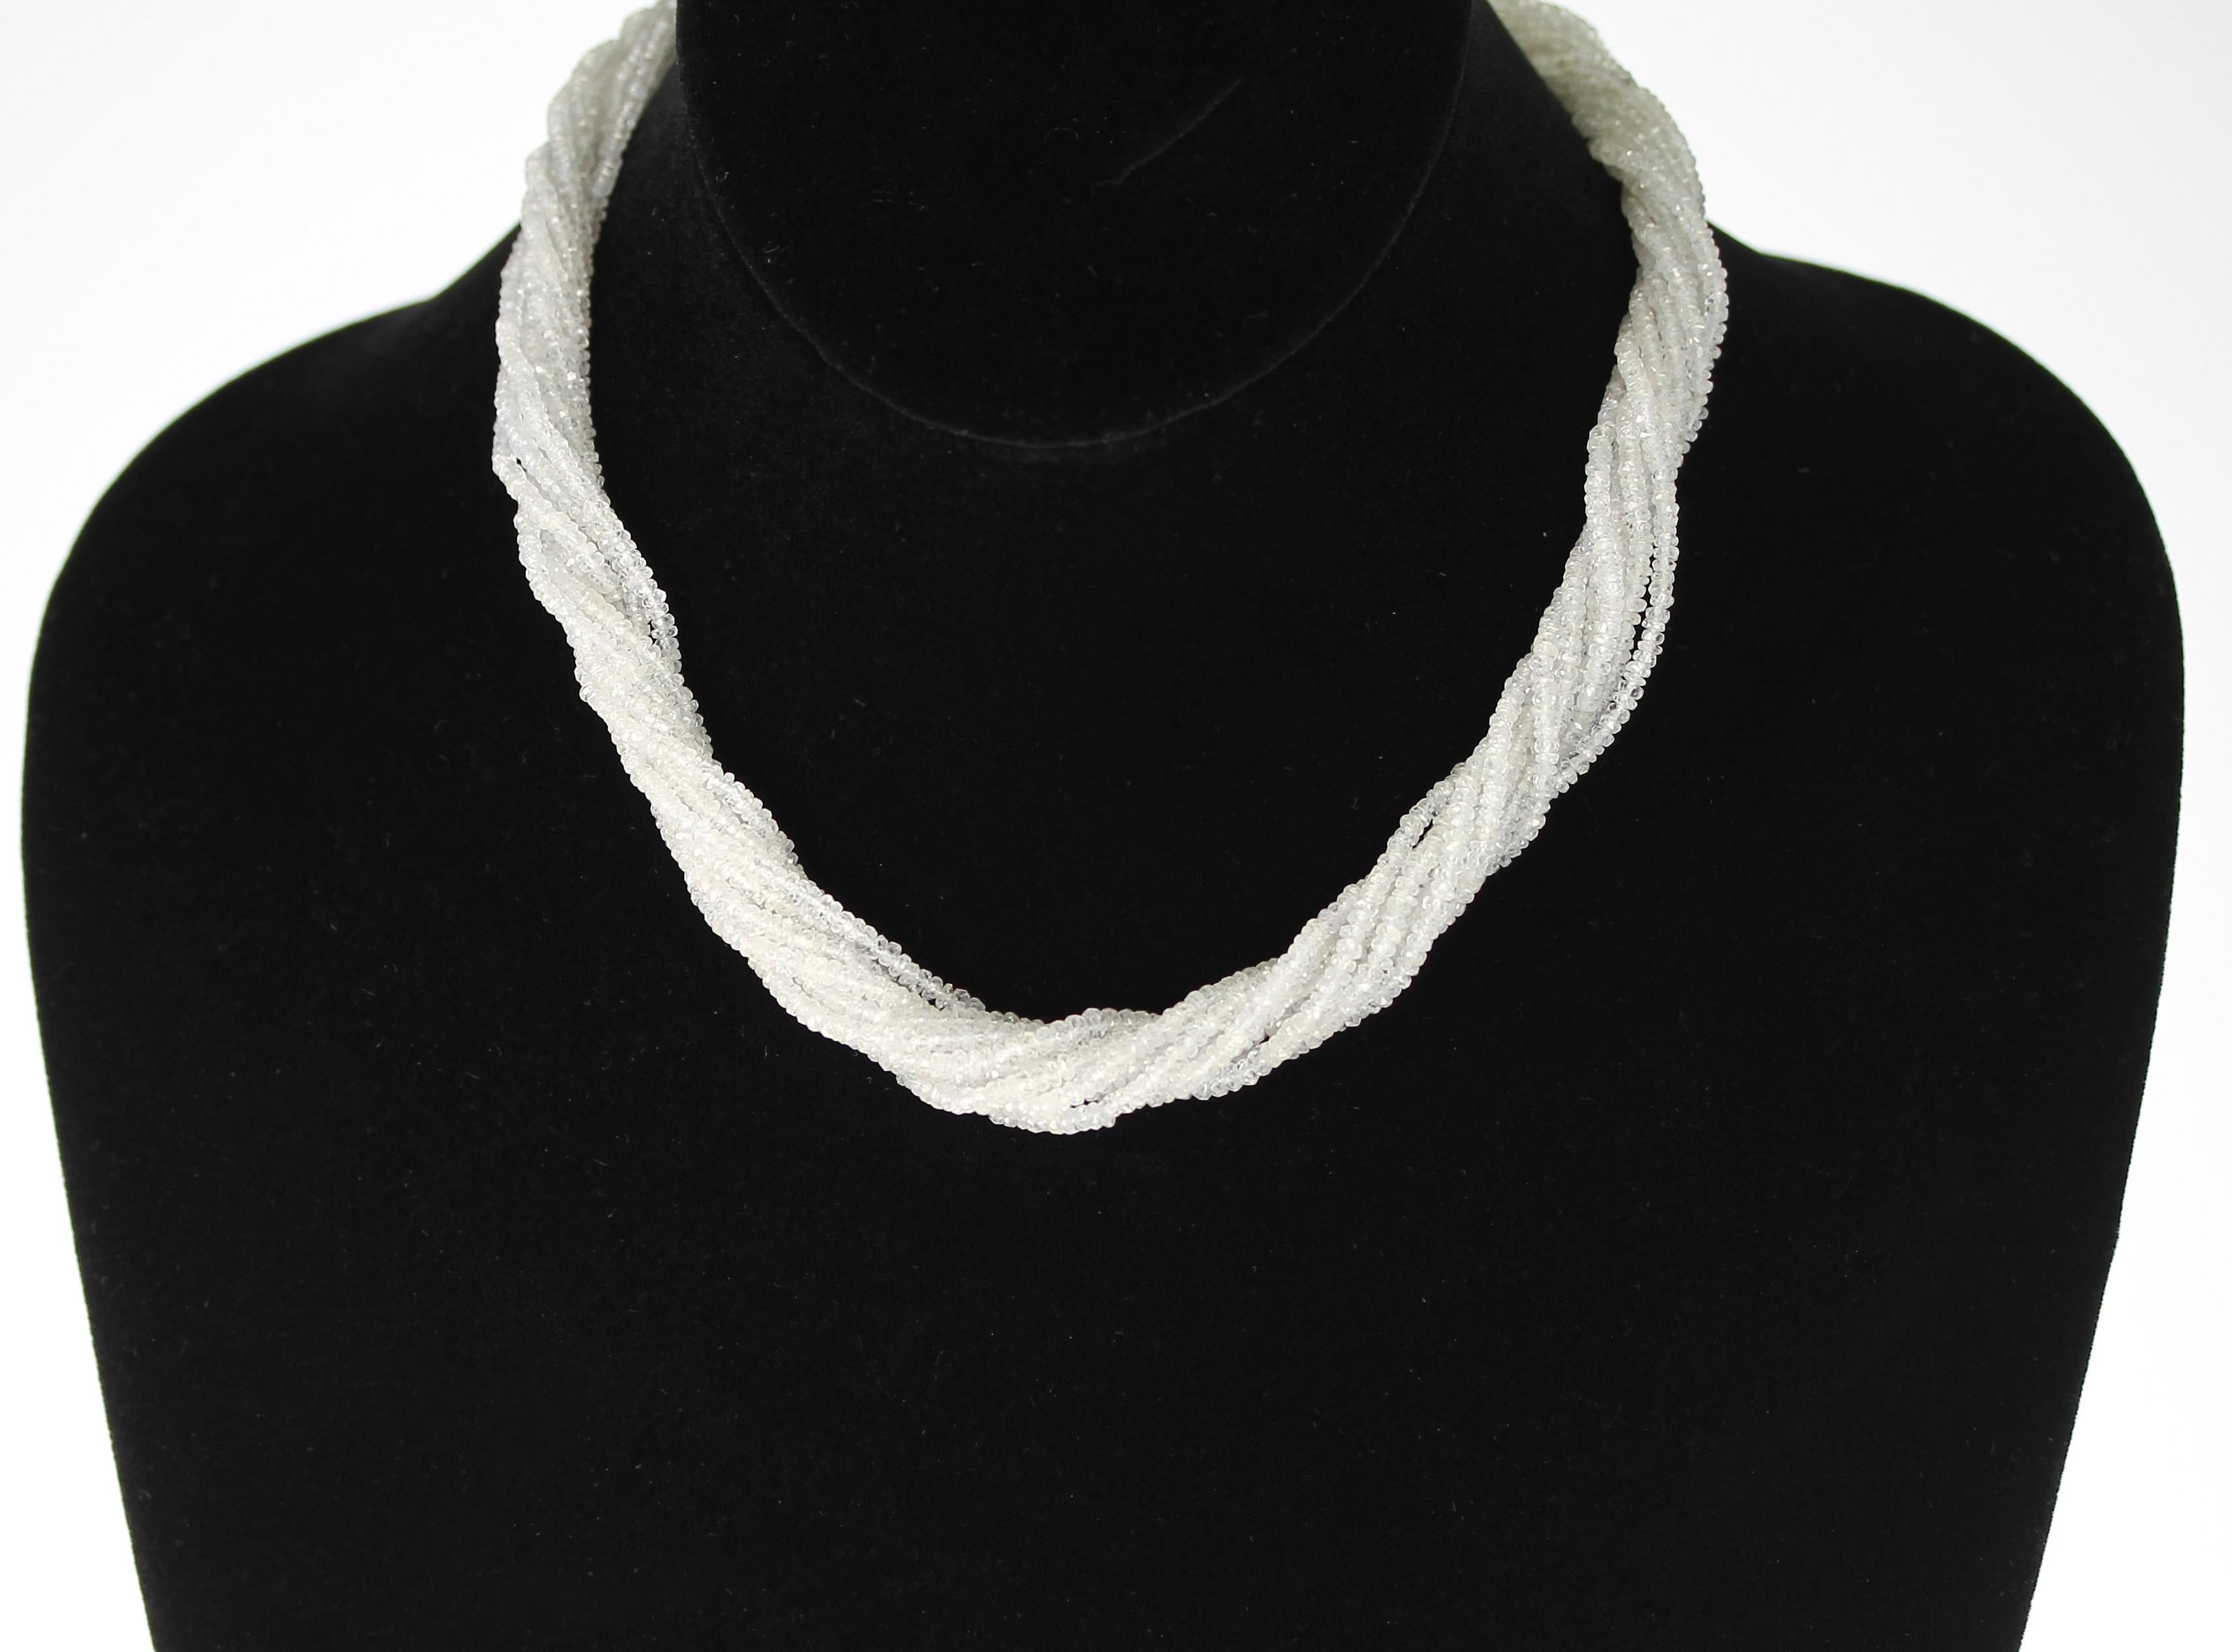 A Genuine & Natural White Sapphire Faceted Beads Choker Necklace with 10 Strands and an 18K White Gold Clasp. The necklace weighs 268 carats, the length is 16 inches, and the beads range from 2MM to 3MM. 
We can also customize the necklace according